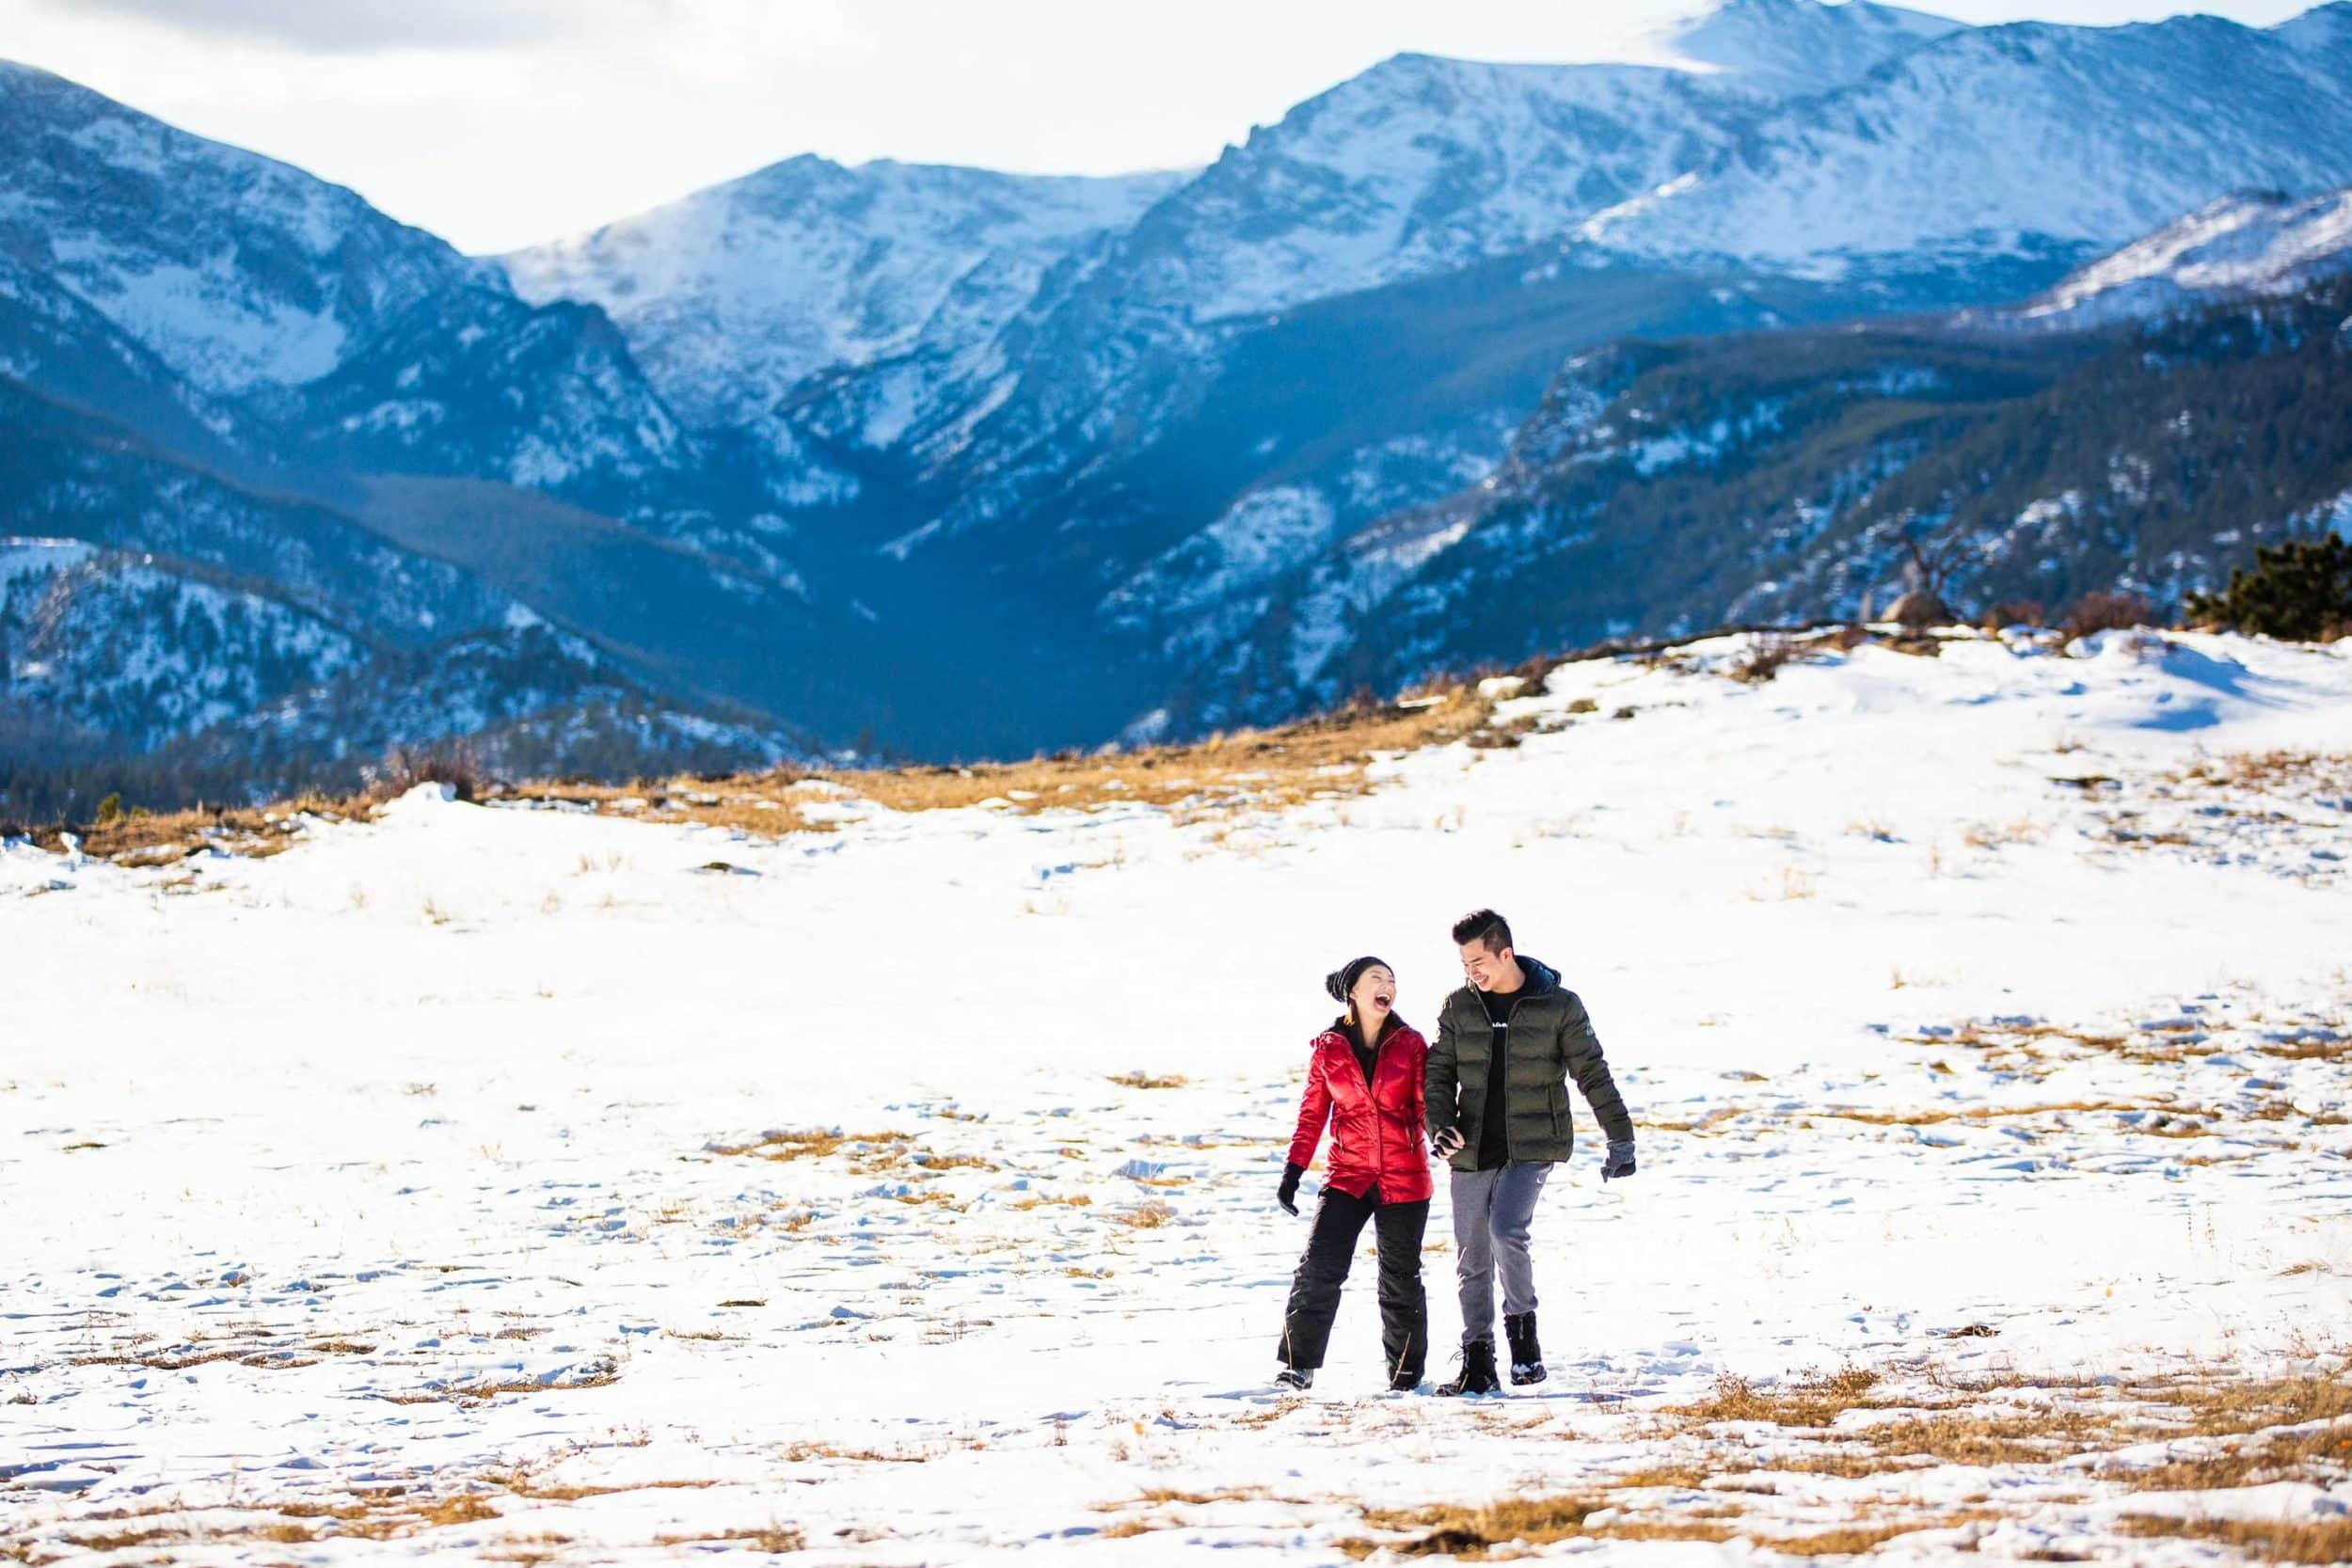 An engagement photographer photo of a couple at moraine park in rocky mountain national park.